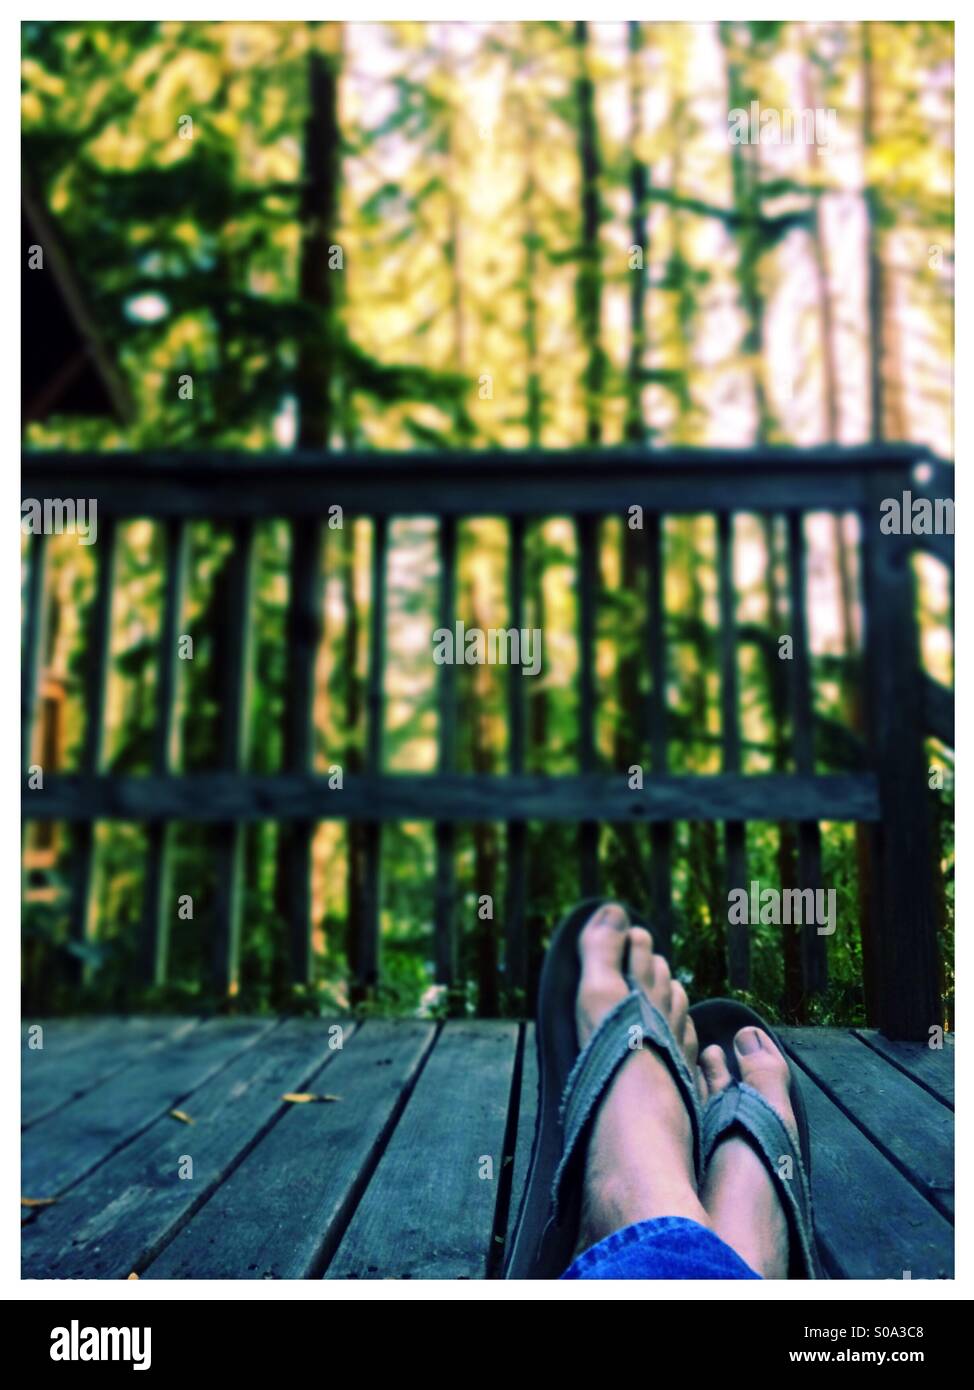 A man's feet crossed while sitting on a wooden deck on a forest. Stock Photo